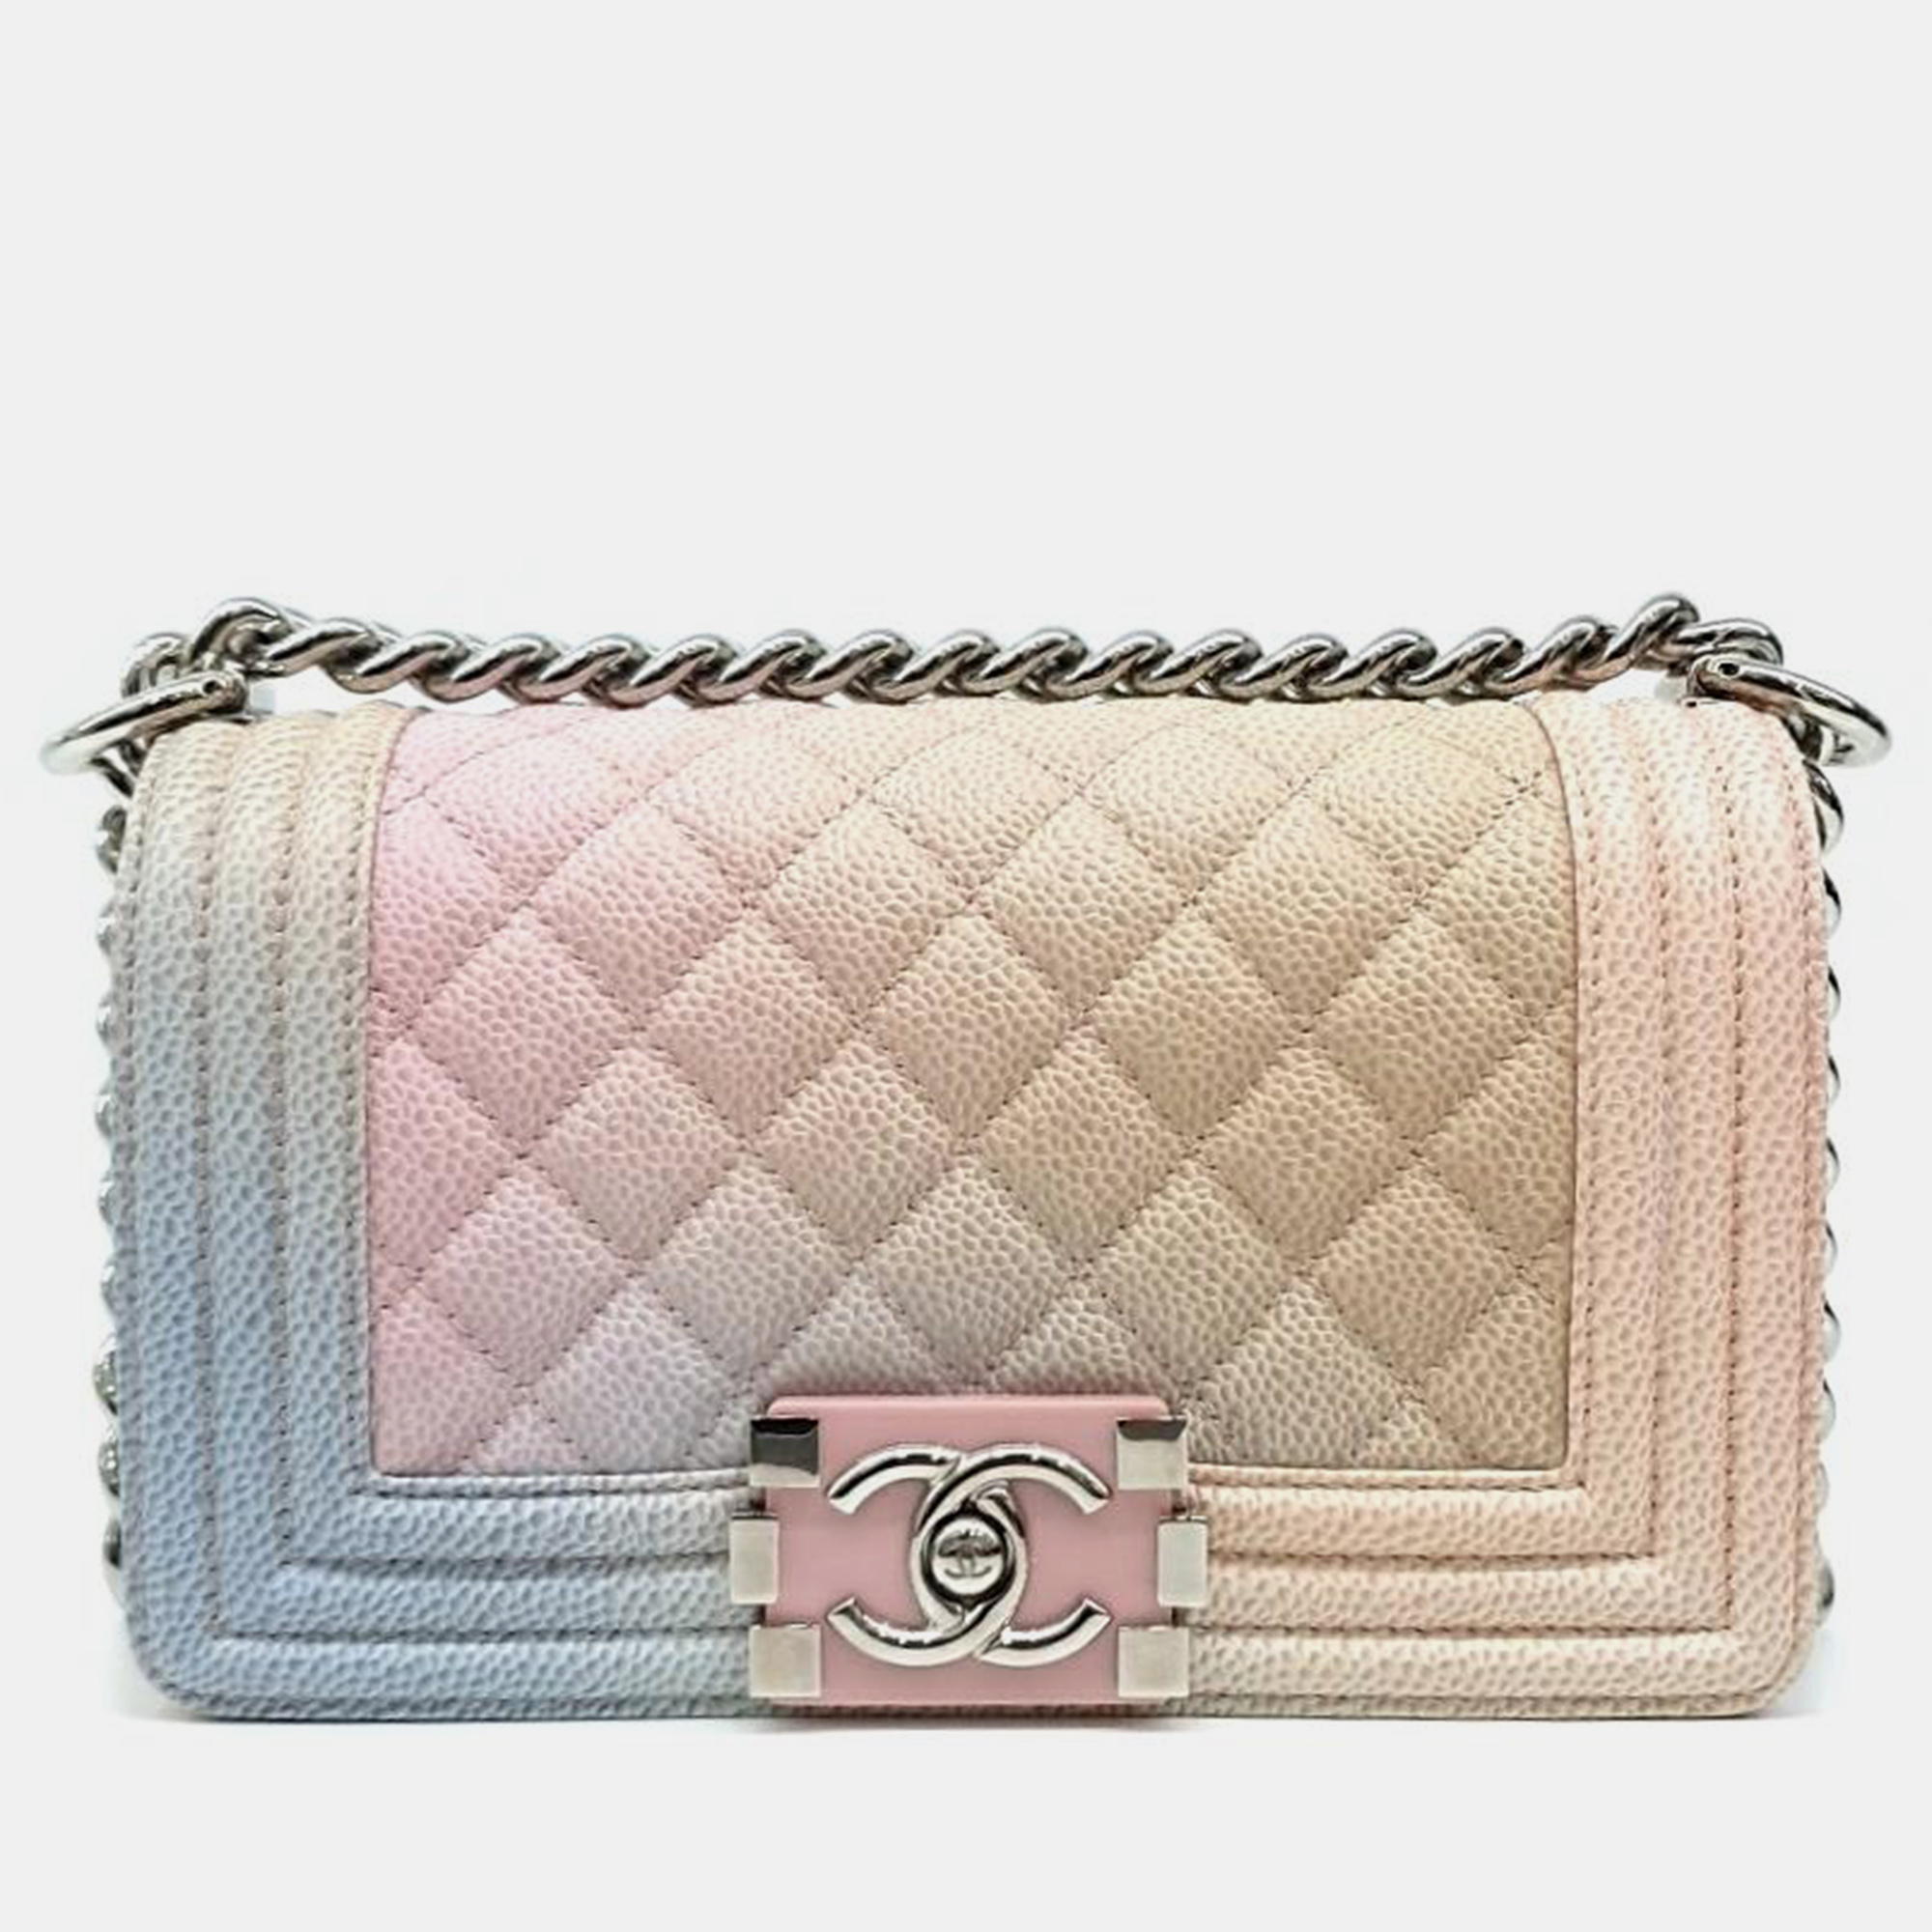 Chanel multicolor leather small boy bag